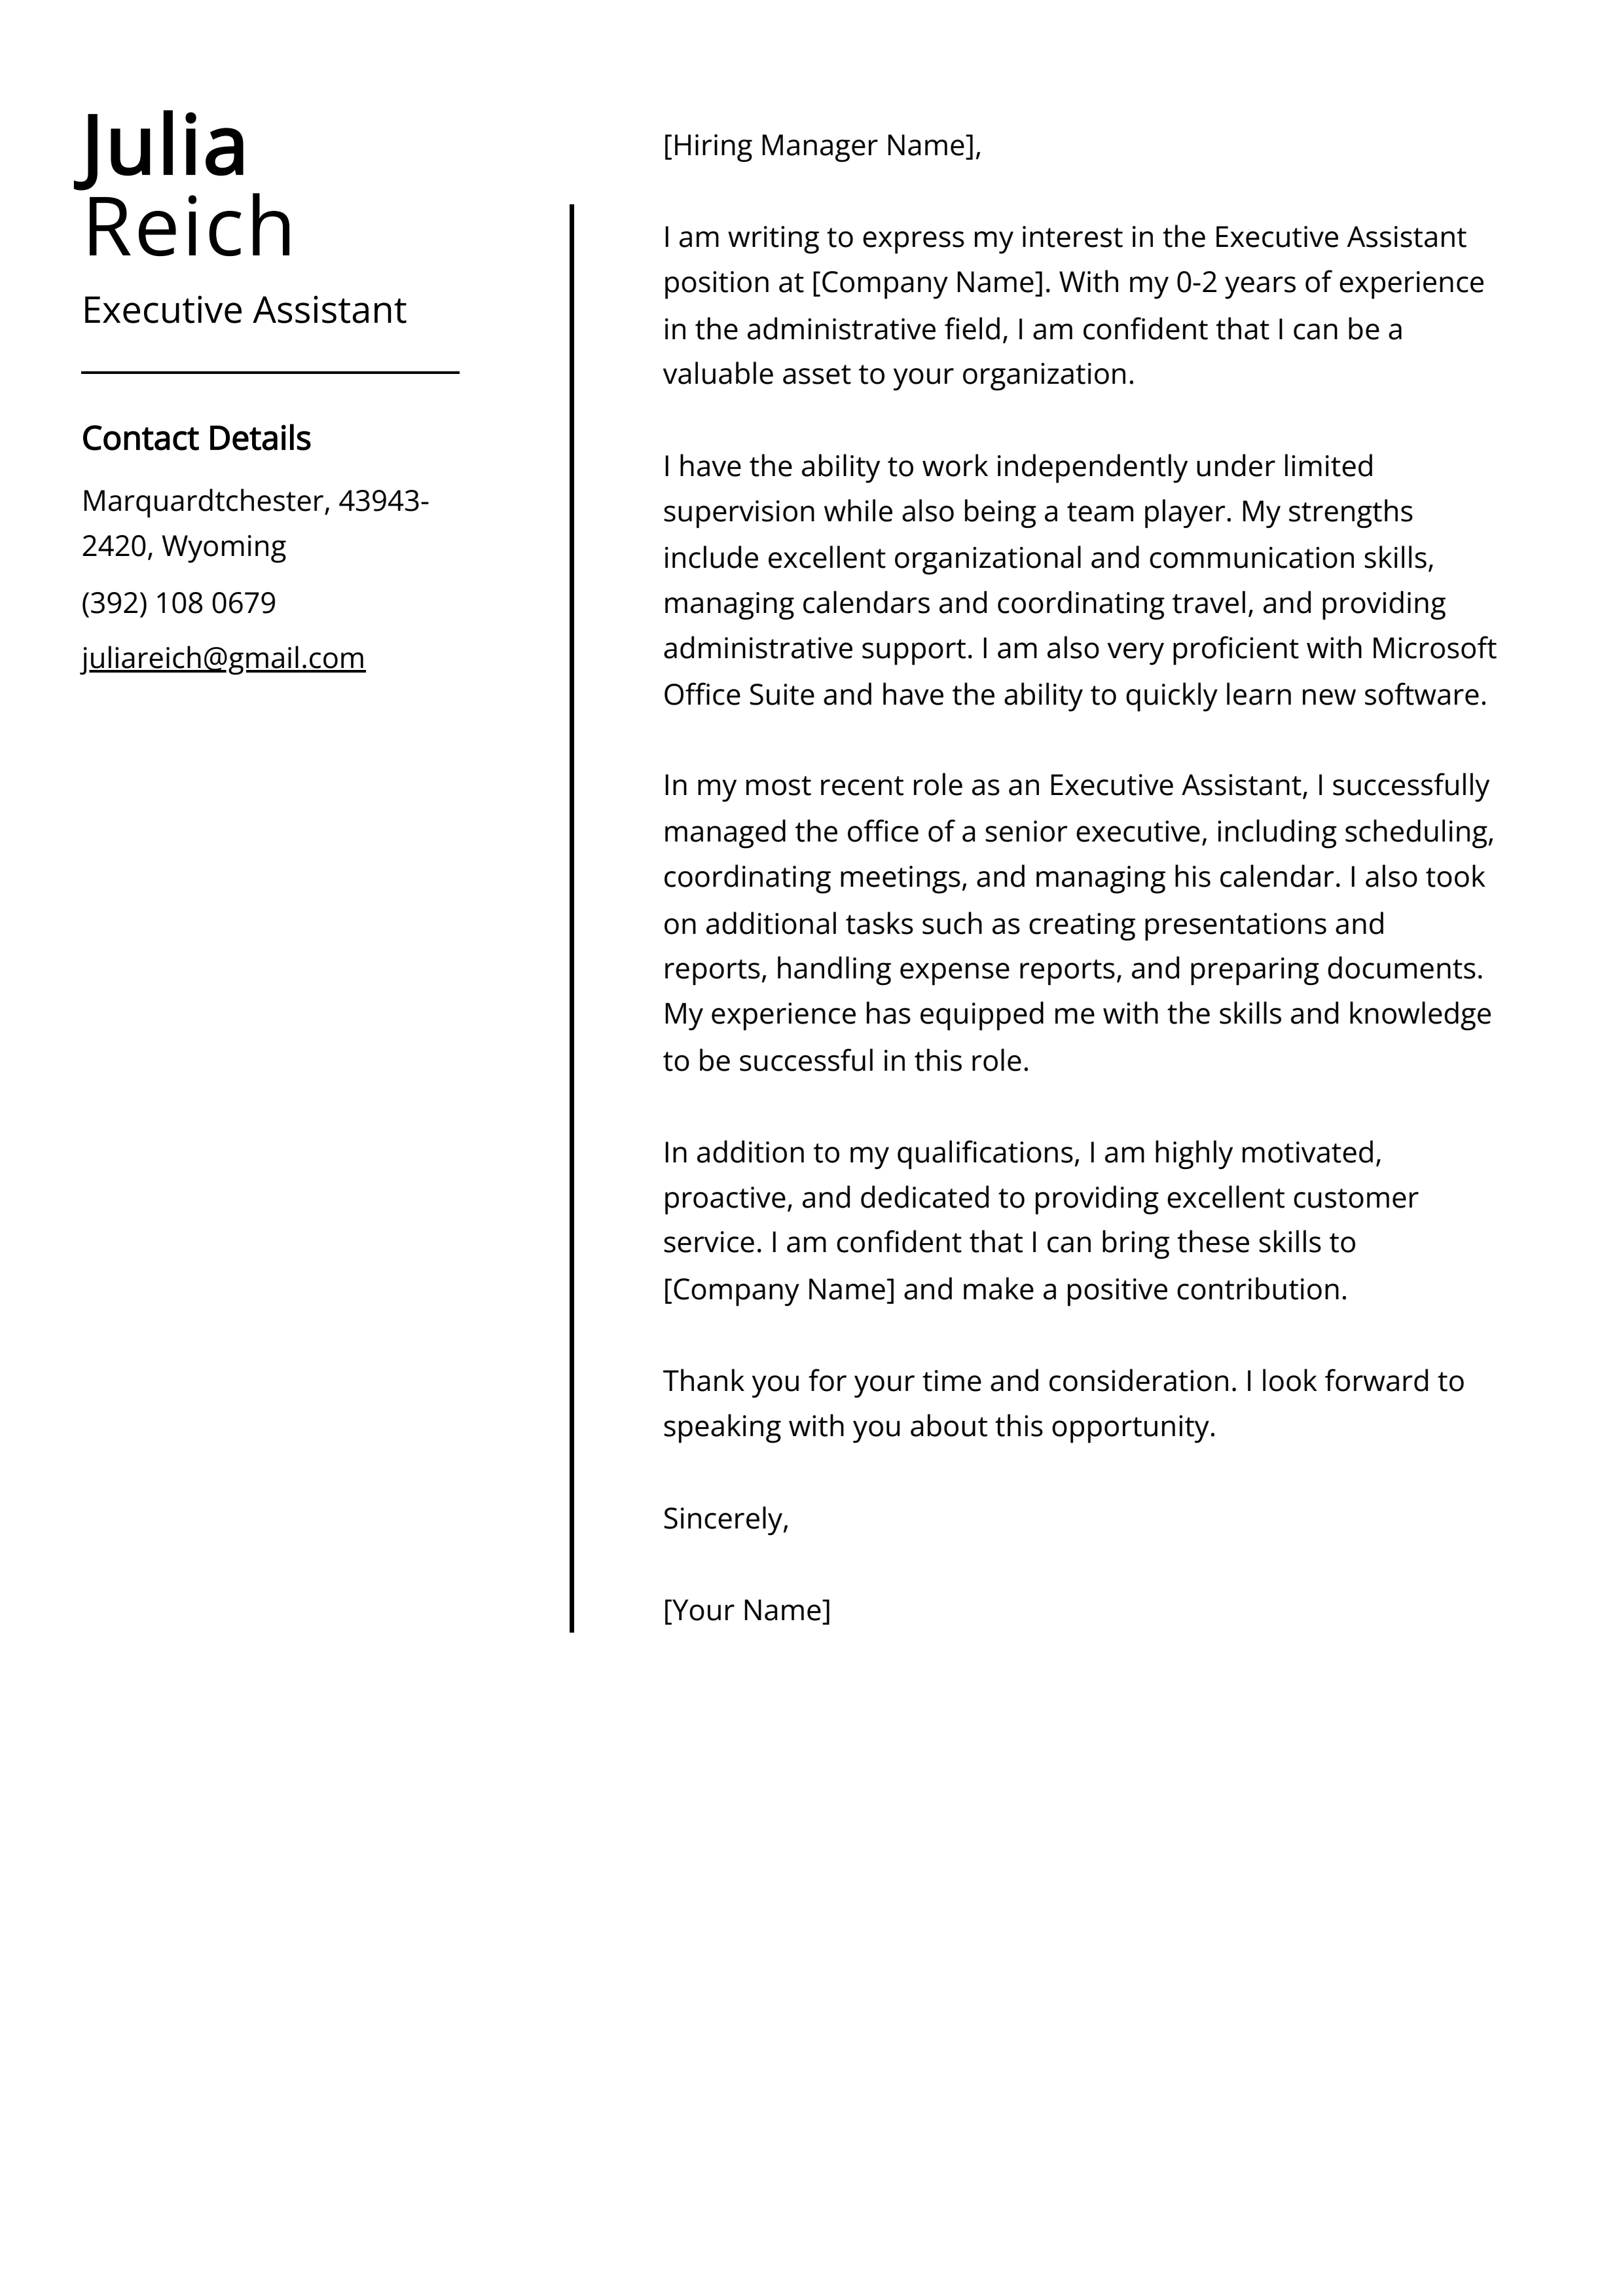 Executive Assistant Cover Letter Example